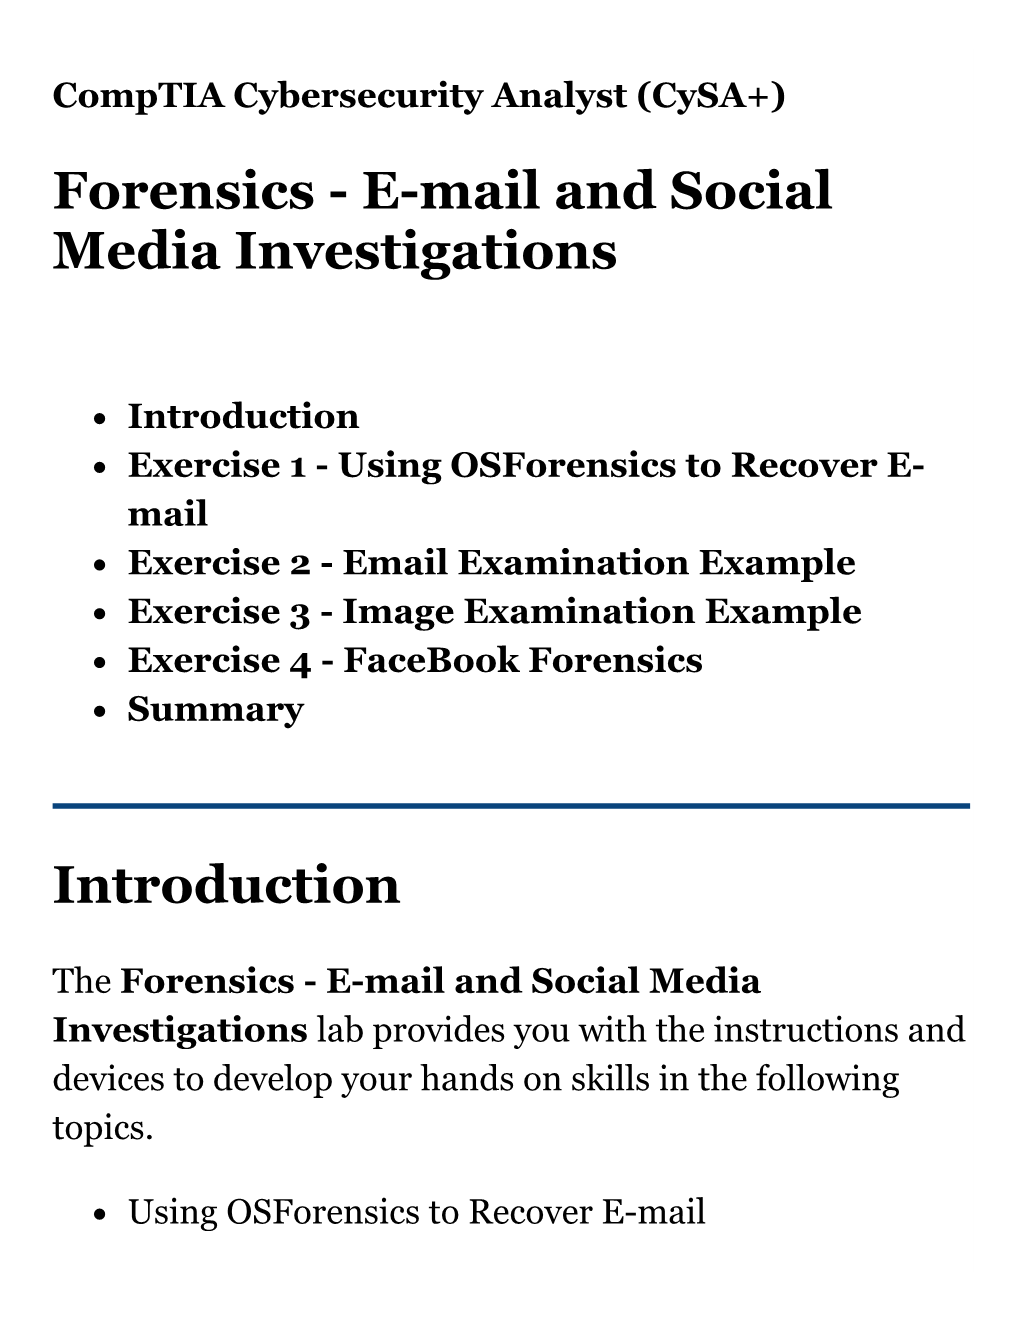 Forensics - E-Mail and Social Media Investigations